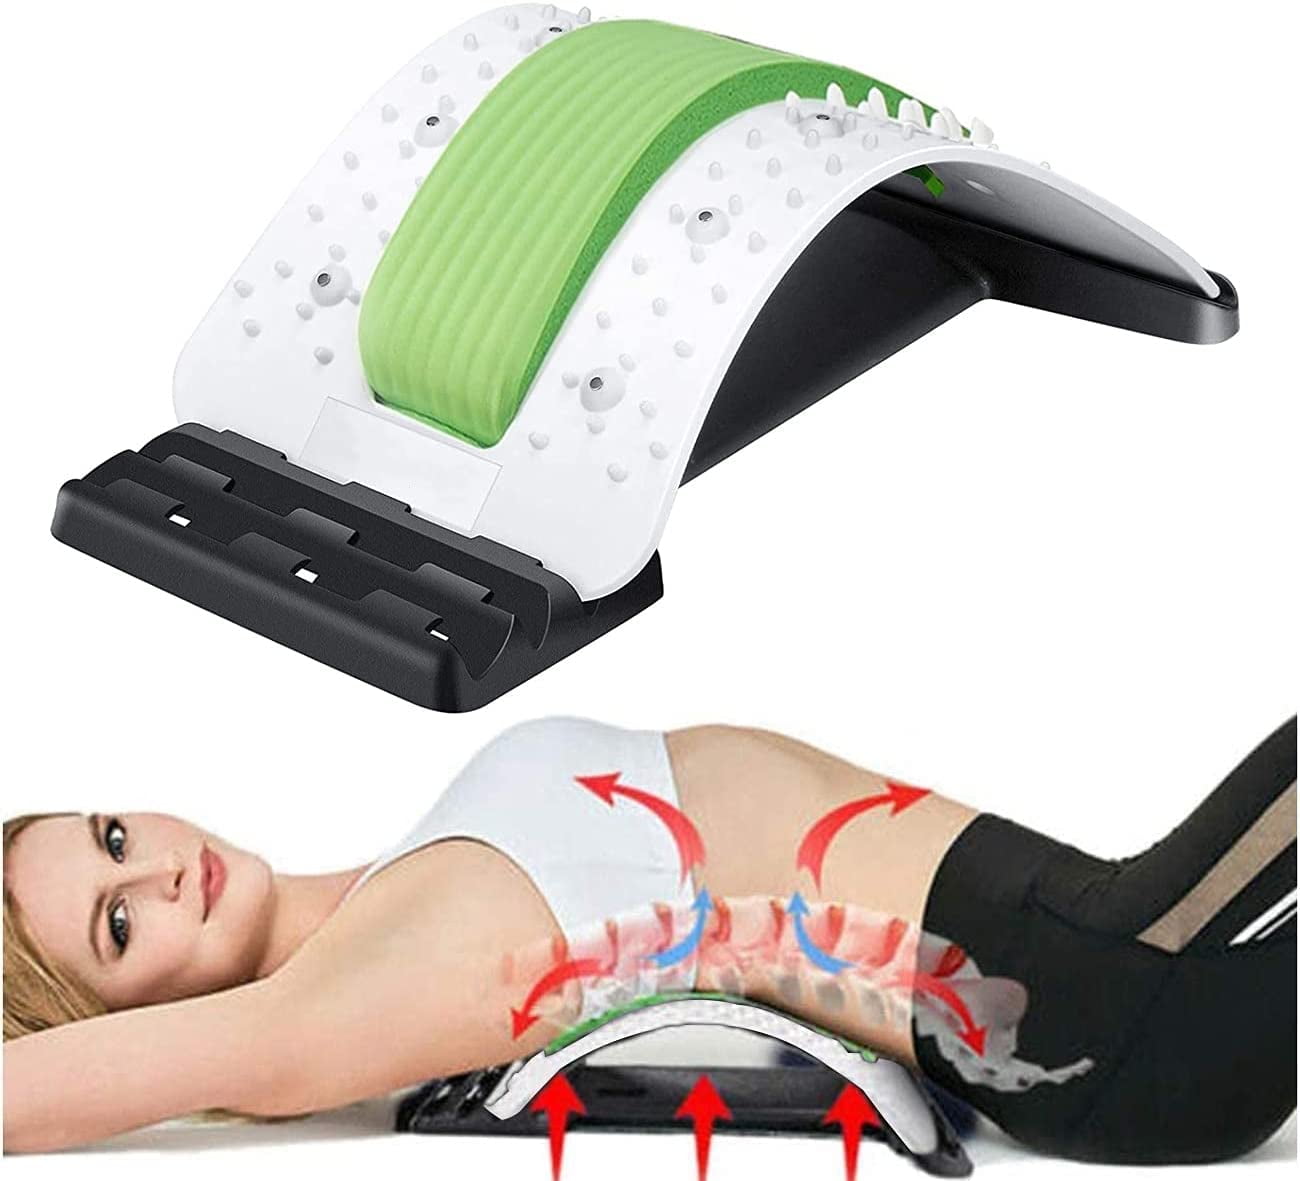 WeeBH Back Stretcher, Lower Back Pain Relief Device, Multi-Level Adjustable  Spine Board for Herniated Disc, Sciatica, Scoliosis, Lumbar Support